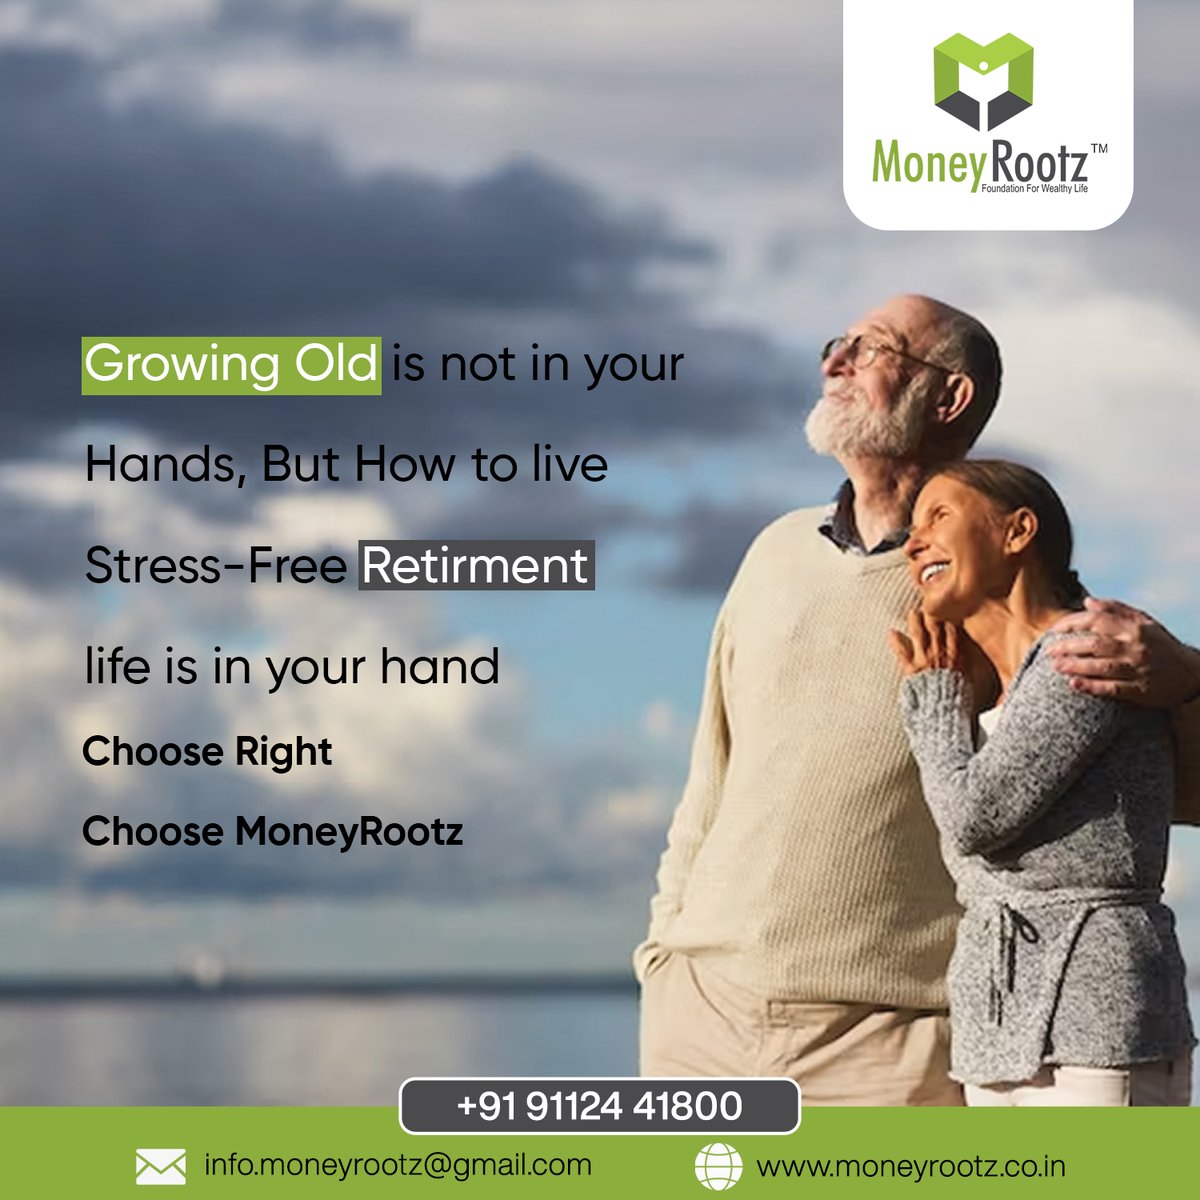 Growing old is not in your hands, But how to live stress-free retirement life is in your hand.

Choose Right, Choose Moneyrootz

#retirement #old #retire #money #happyretirement #retirementlife #passiveincome #income #SWP #retirementpension #pension #family #financialfreedom